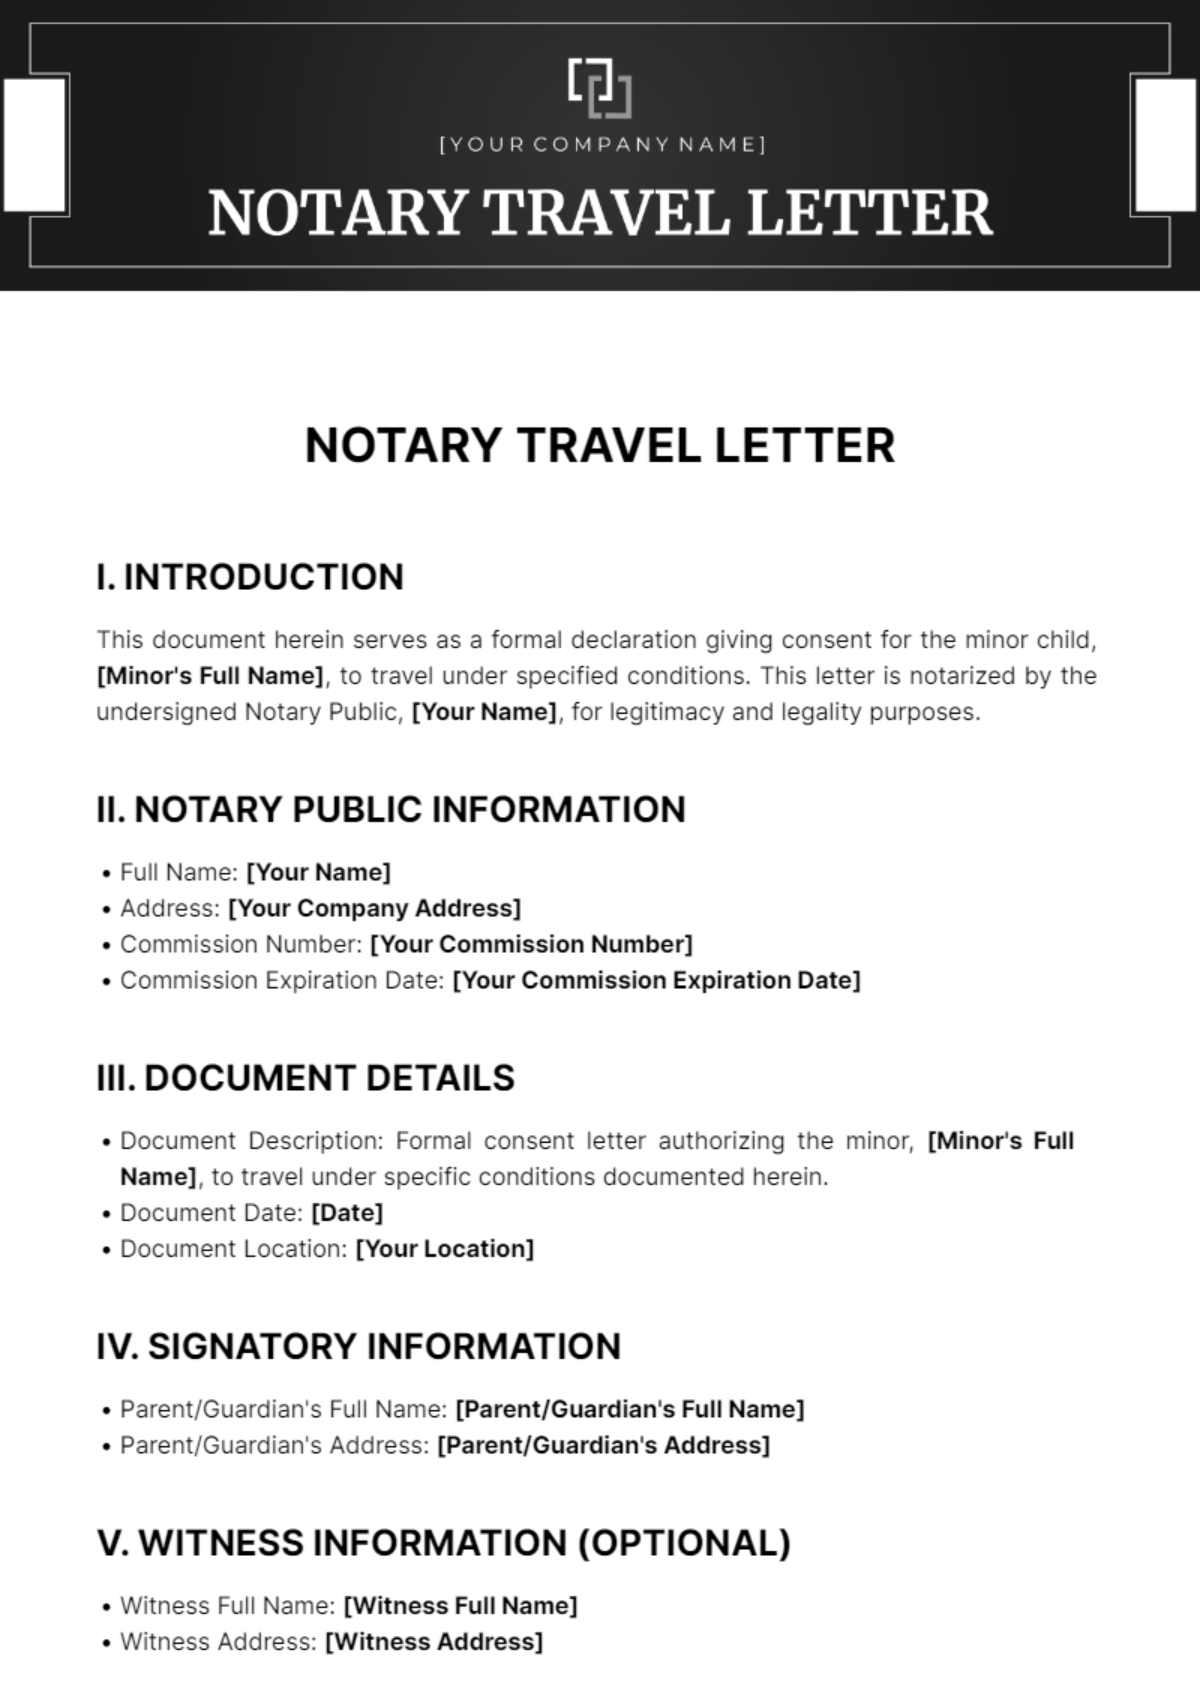 Notary Travel Letter Template